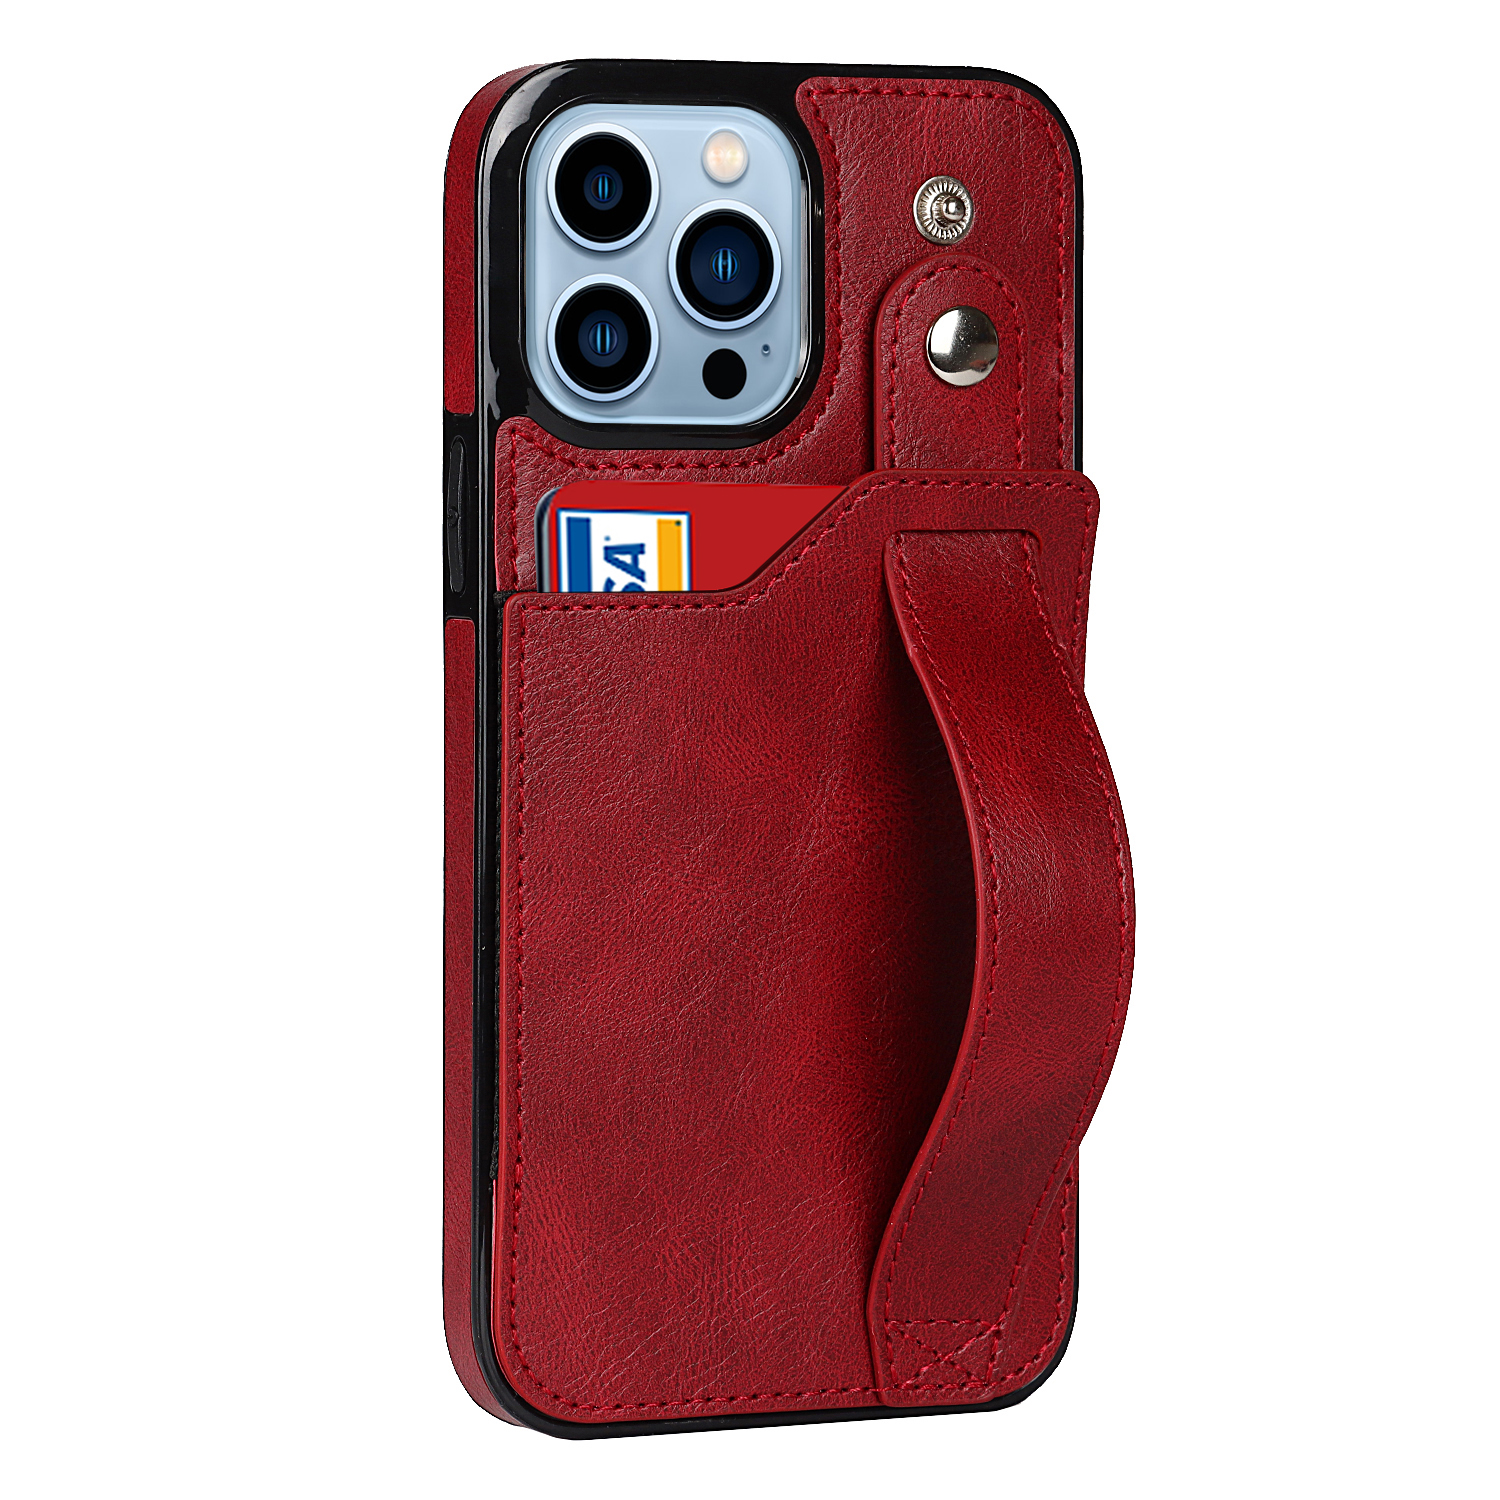 Samsung Galaxy S21 Ultra Back Cover Hoesje met Handvat - leer- Handvat - Backcover - Samsung Galaxy S21 Ultra - Rood